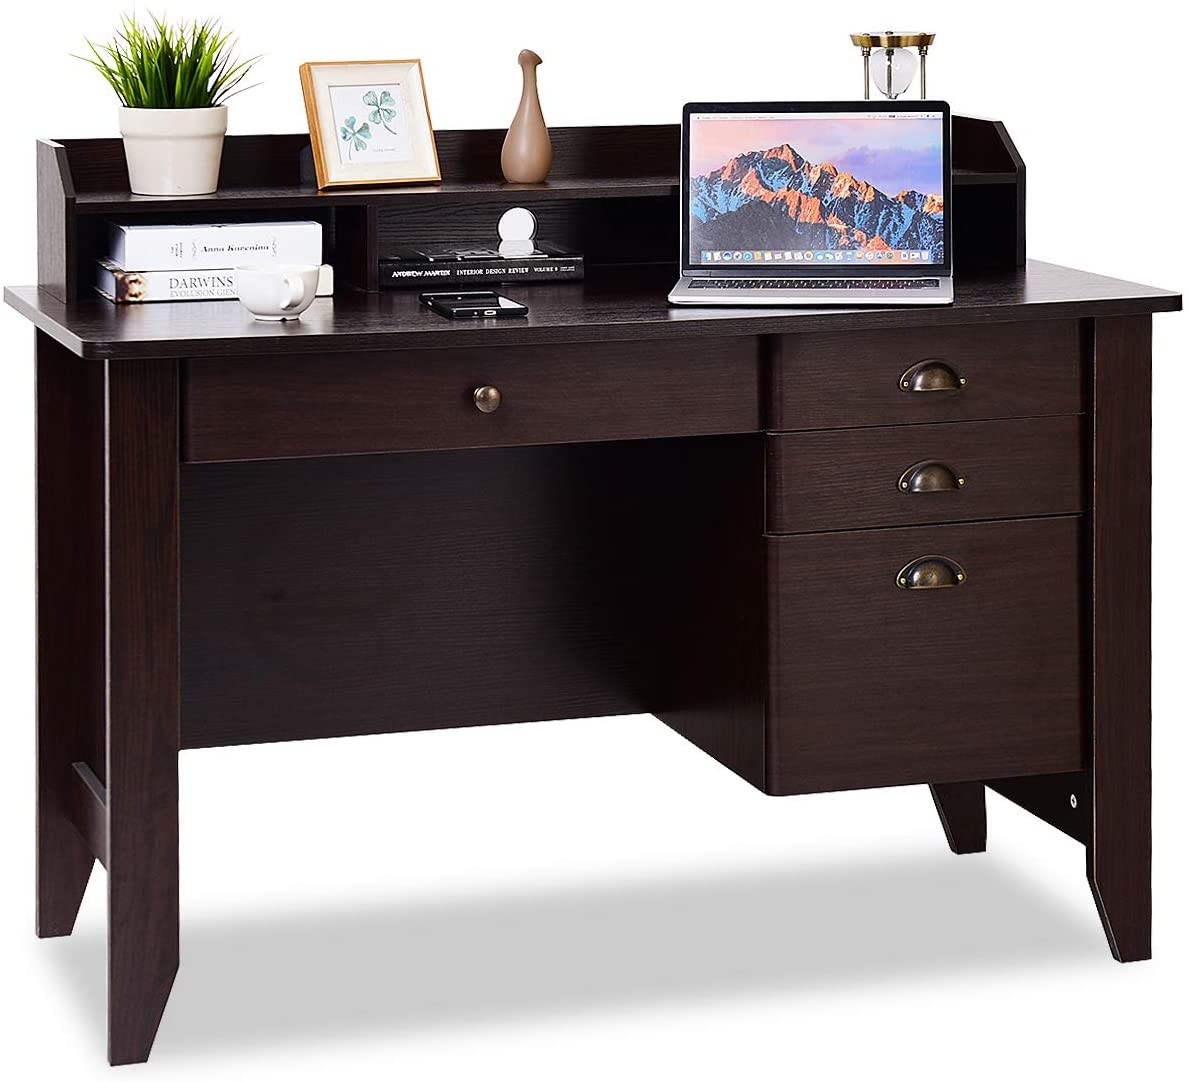 Best small desk with side drawers the home marketplace